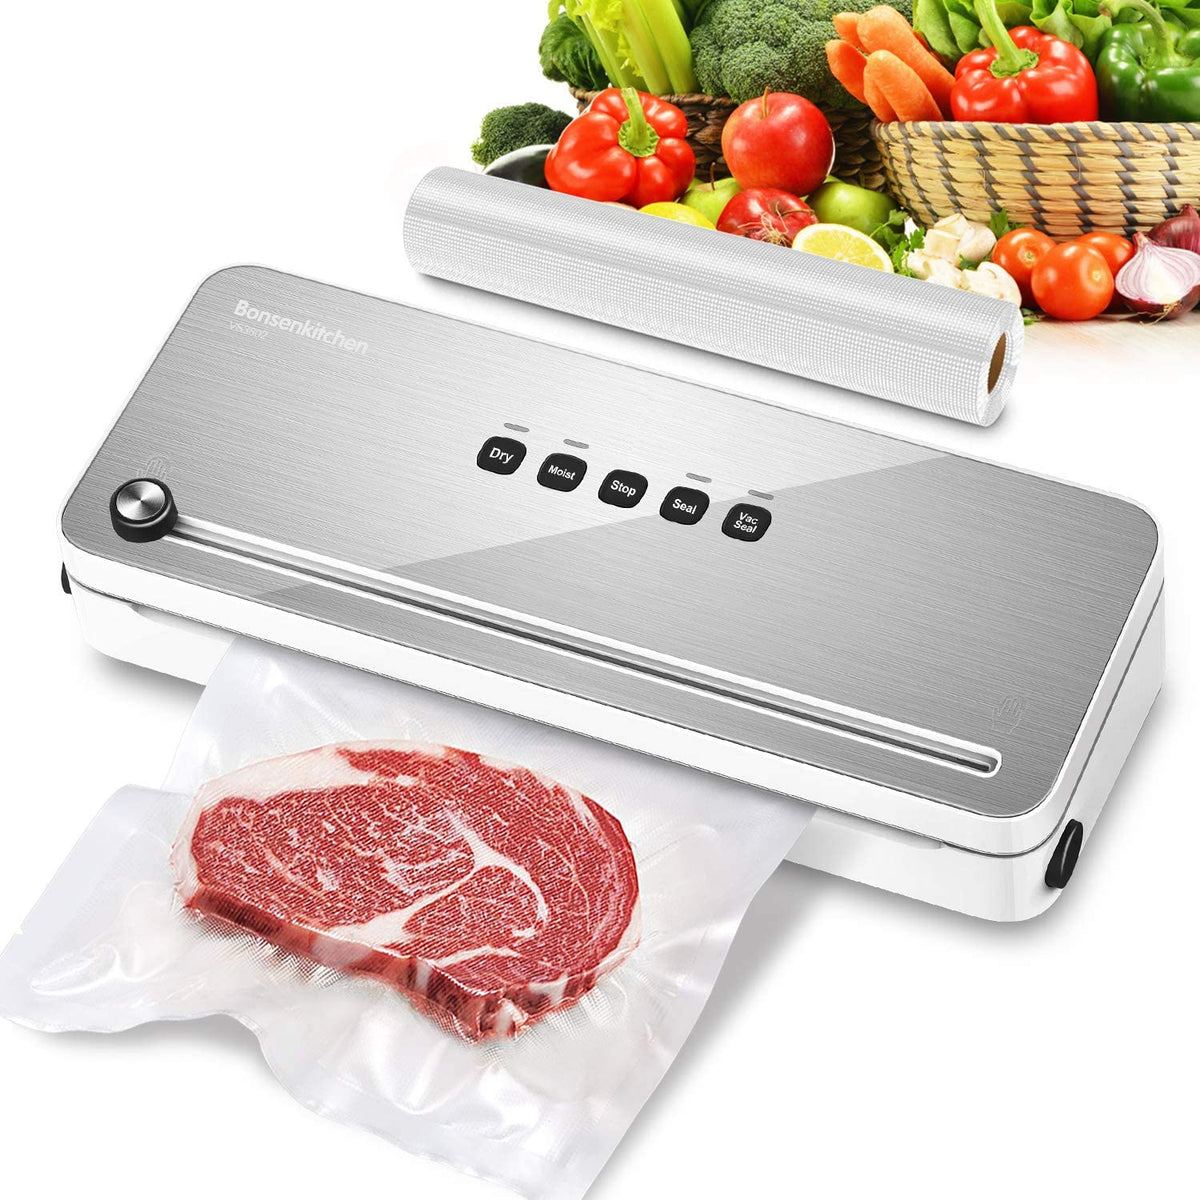 Bonsenkitchen Dry Vacuum Sealer Machine with 5-in-1 Easy Options for Sous  Vide and Food Storage, Air Sealer Machine with 5 Vacuum Seal Bags & 1 Air